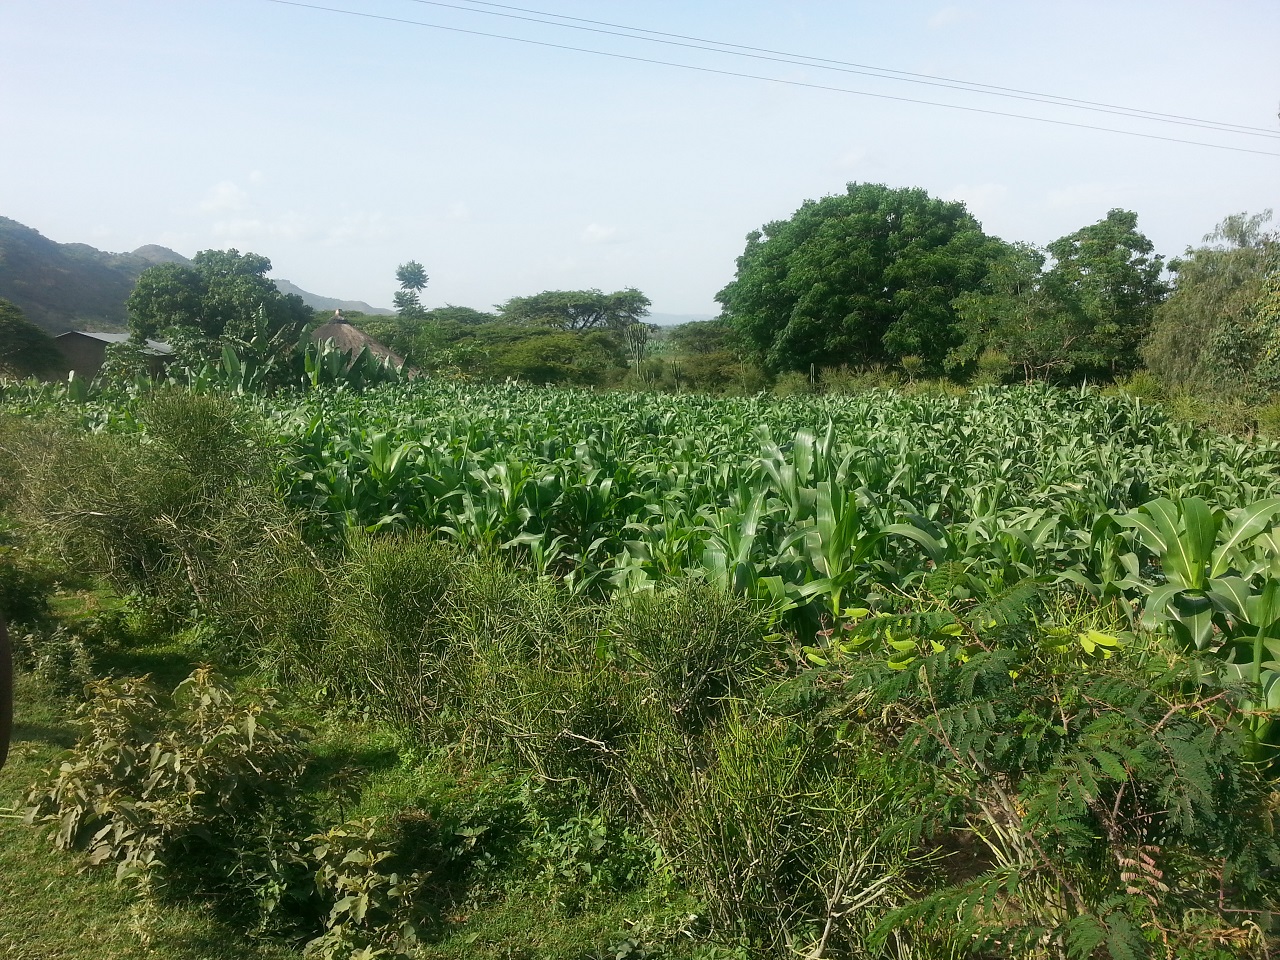  Maize-legume cropping system: Insights from Smallholder Farmers in Kenya.